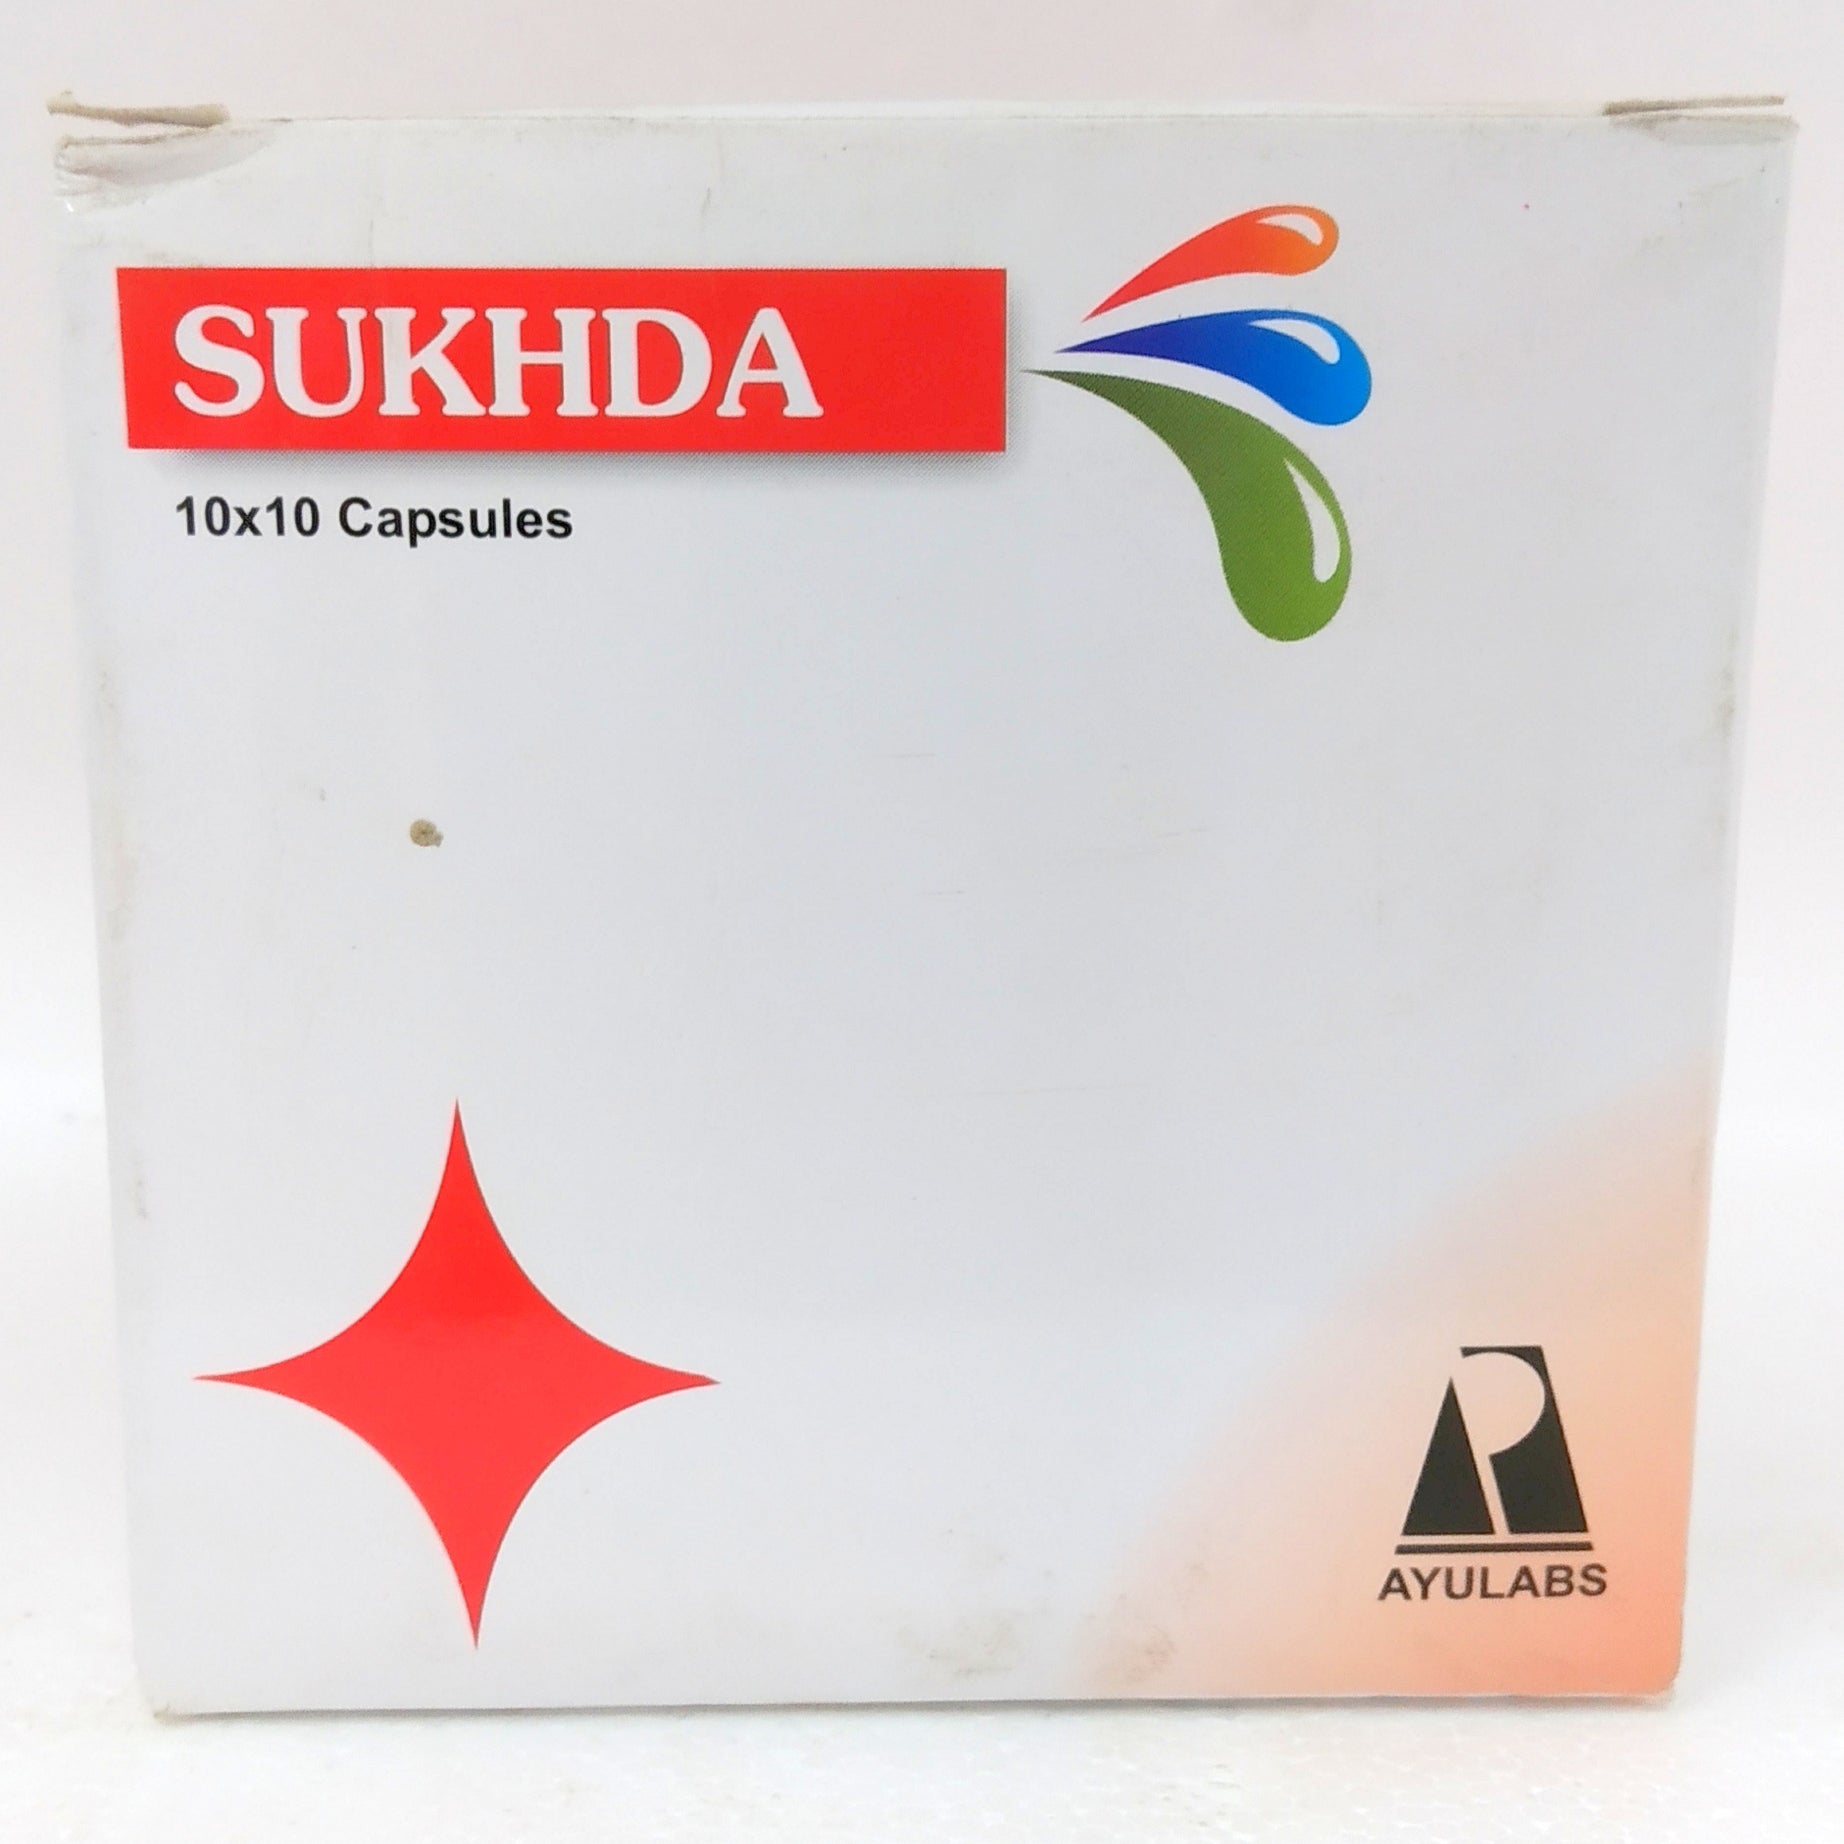 Shop Sukdha 10Capsules at price 43.00 from Ayulabs Online - Ayush Care